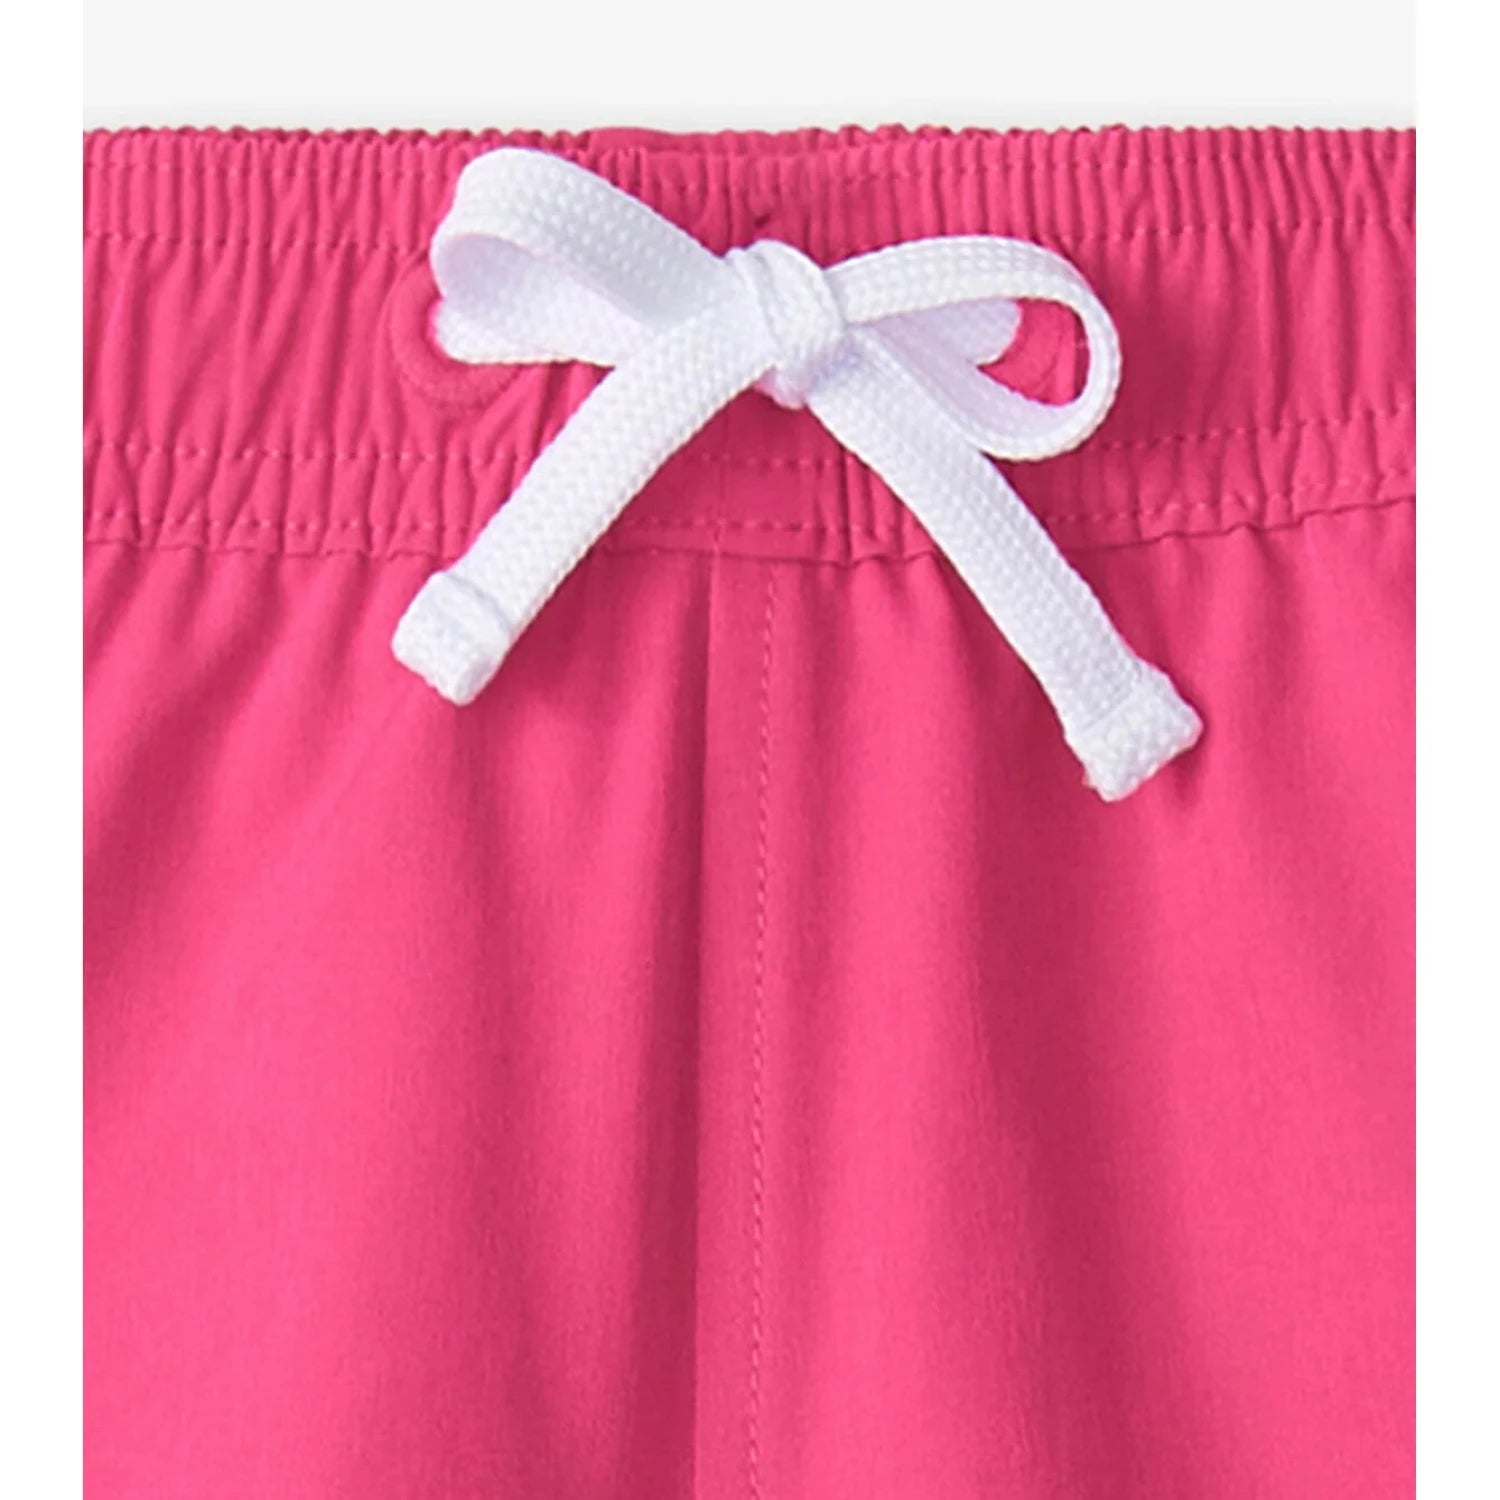 Hatley Girl's Pink Quick Dry Shorts shown in the Pink color option. Front Drawstring view.